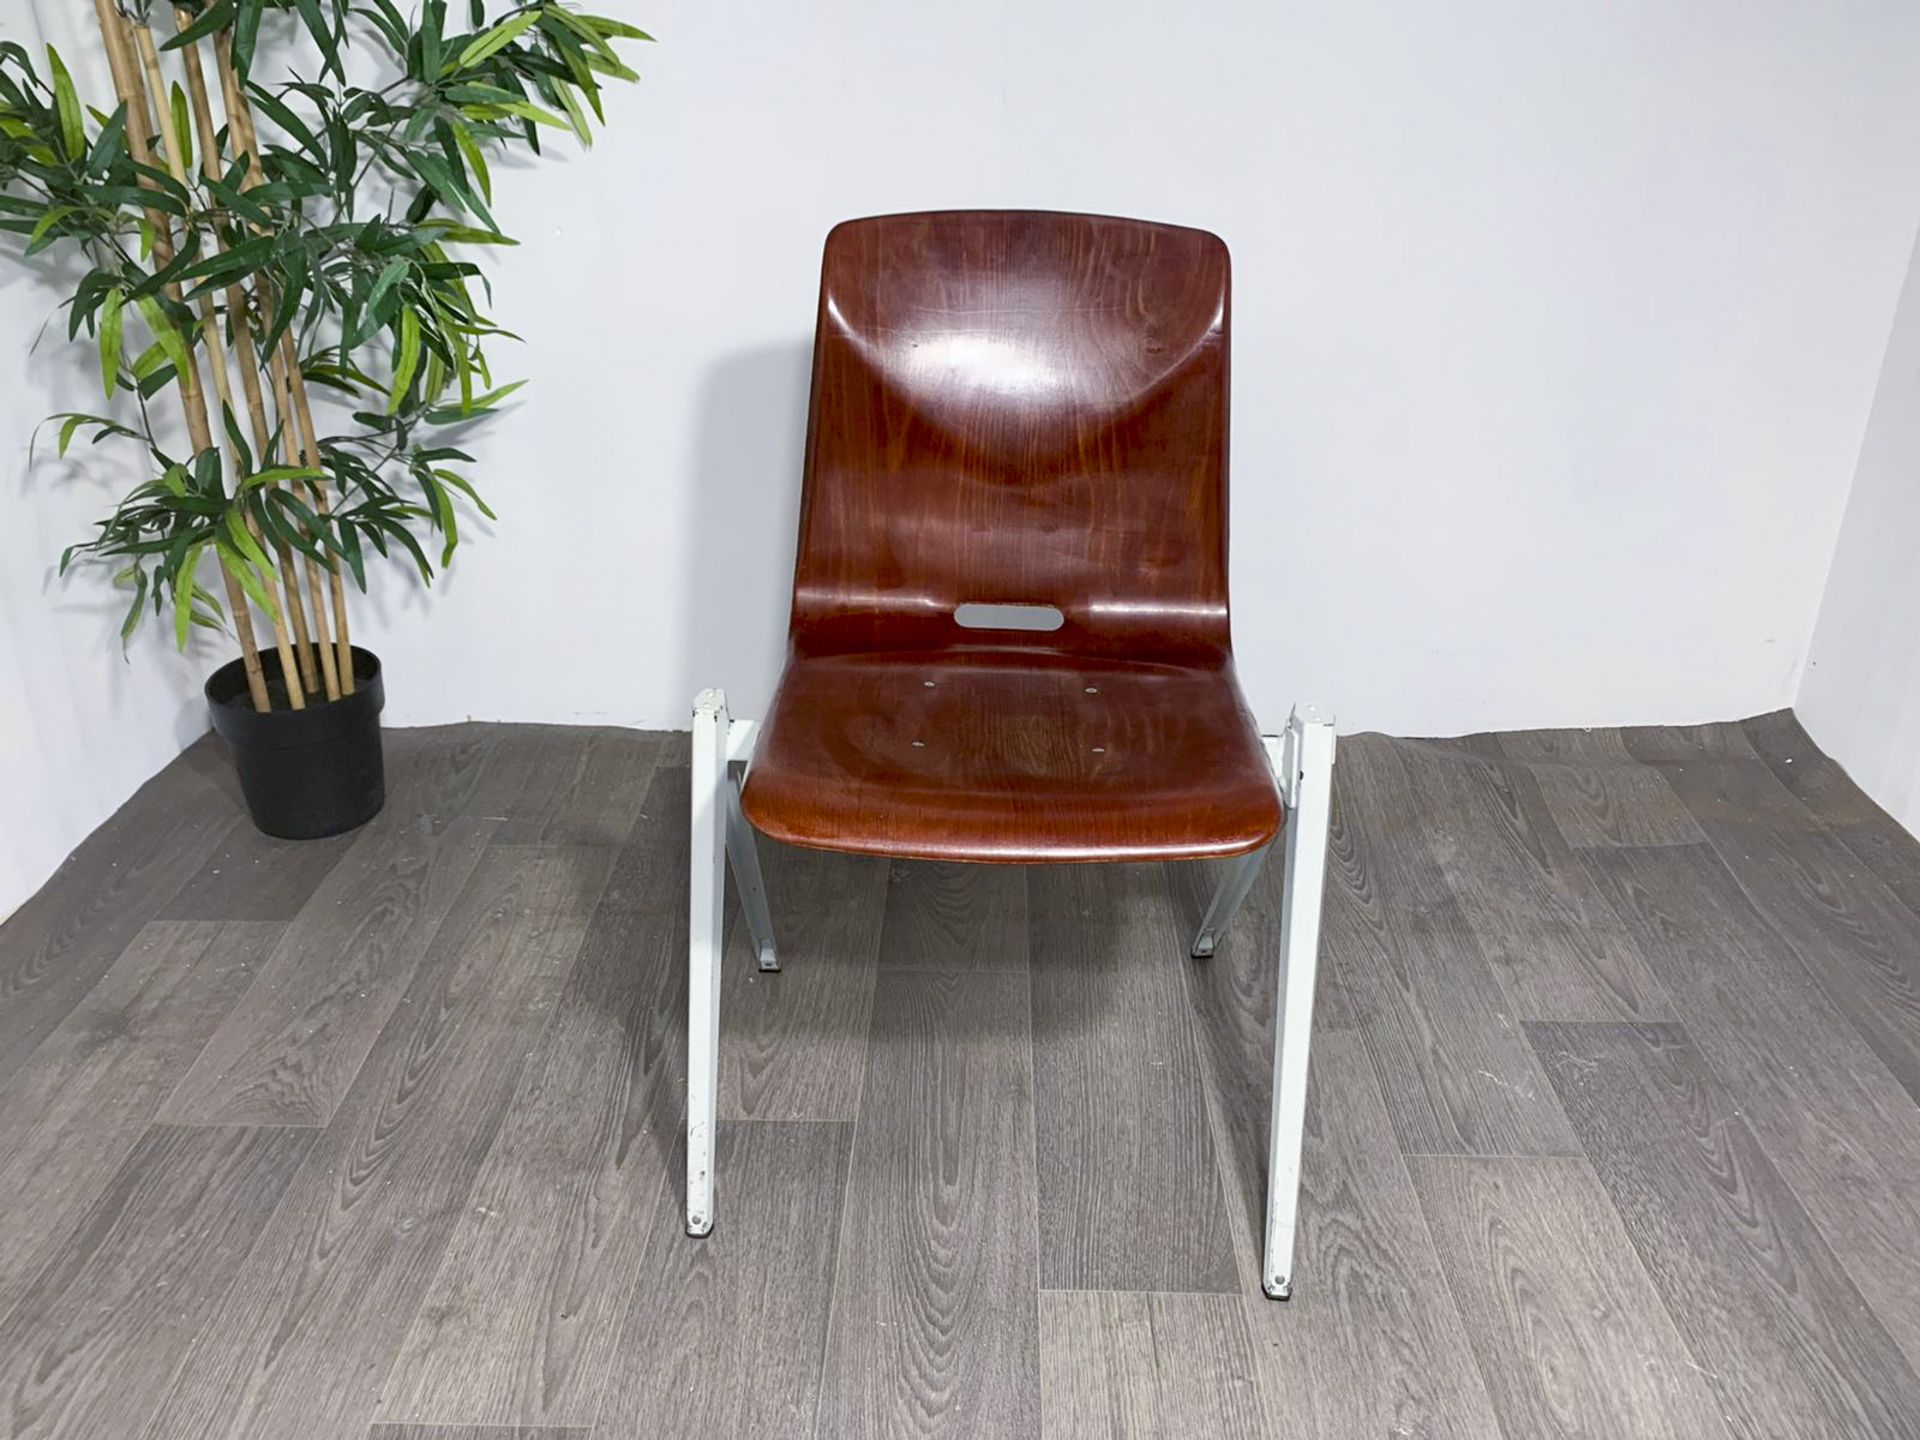 Thur Op Seat Stackable Chair - Image 6 of 8